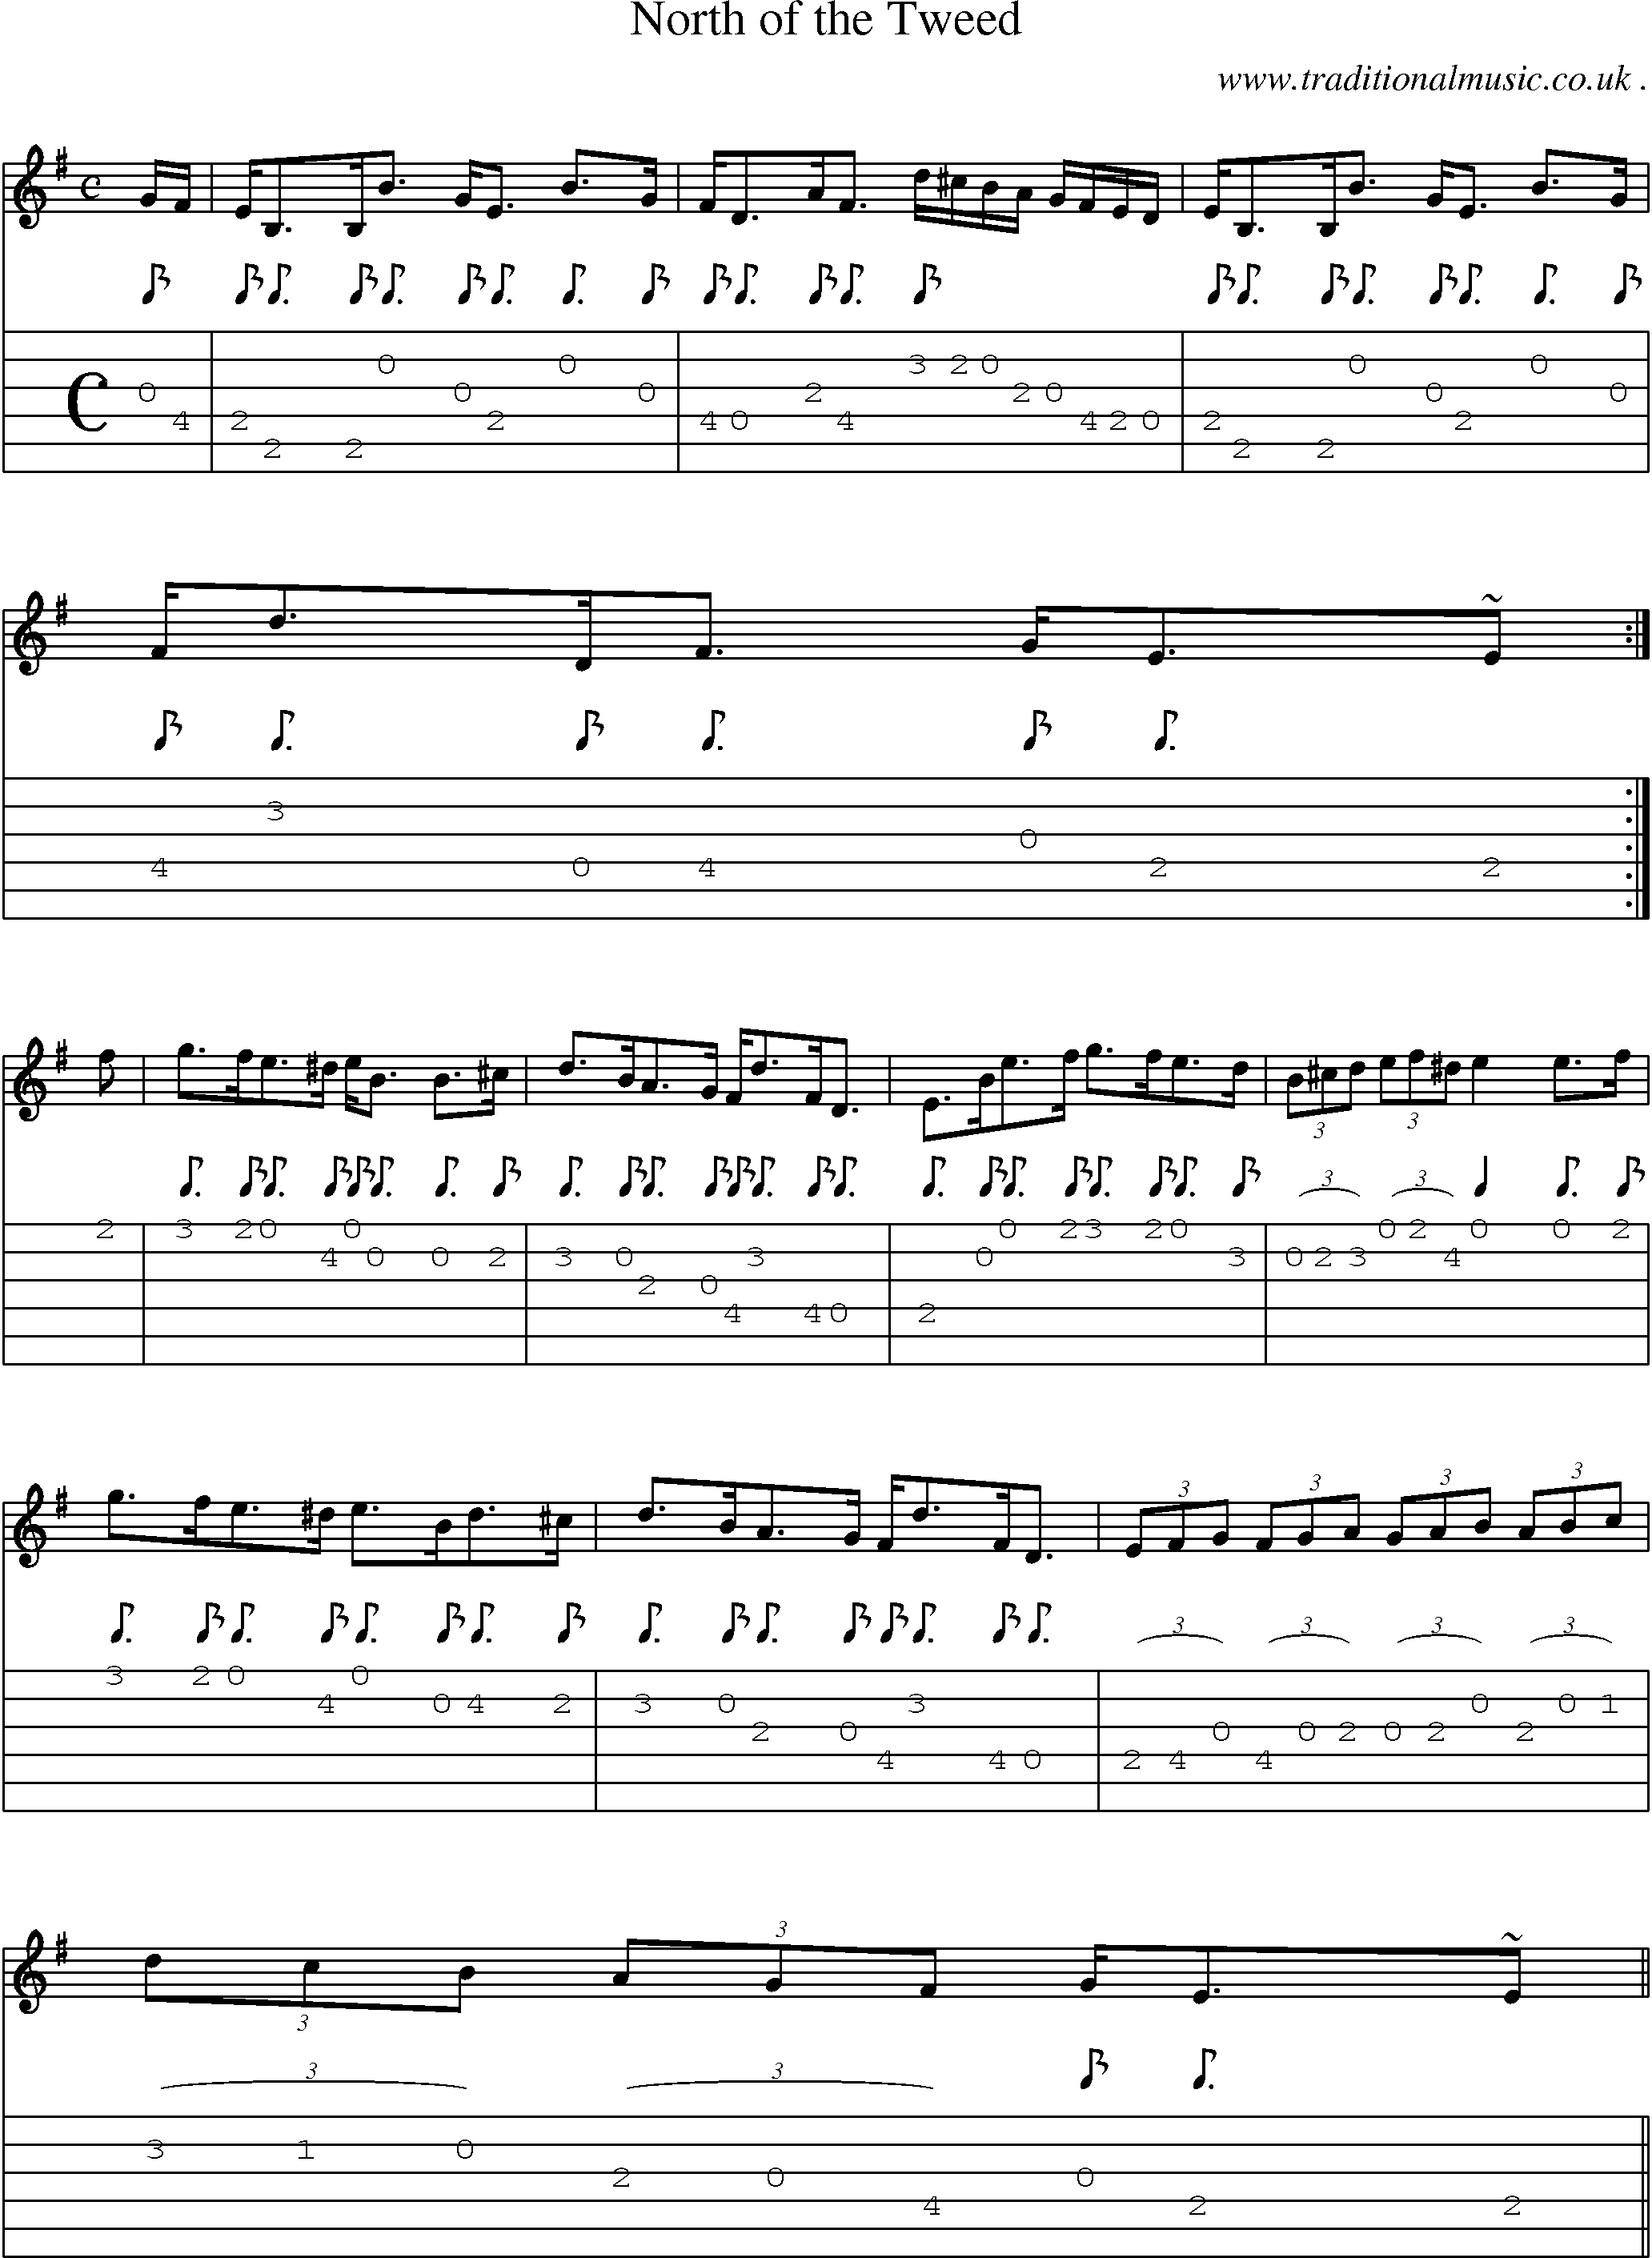 Sheet-music  score, Chords and Guitar Tabs for North Of The Tweed